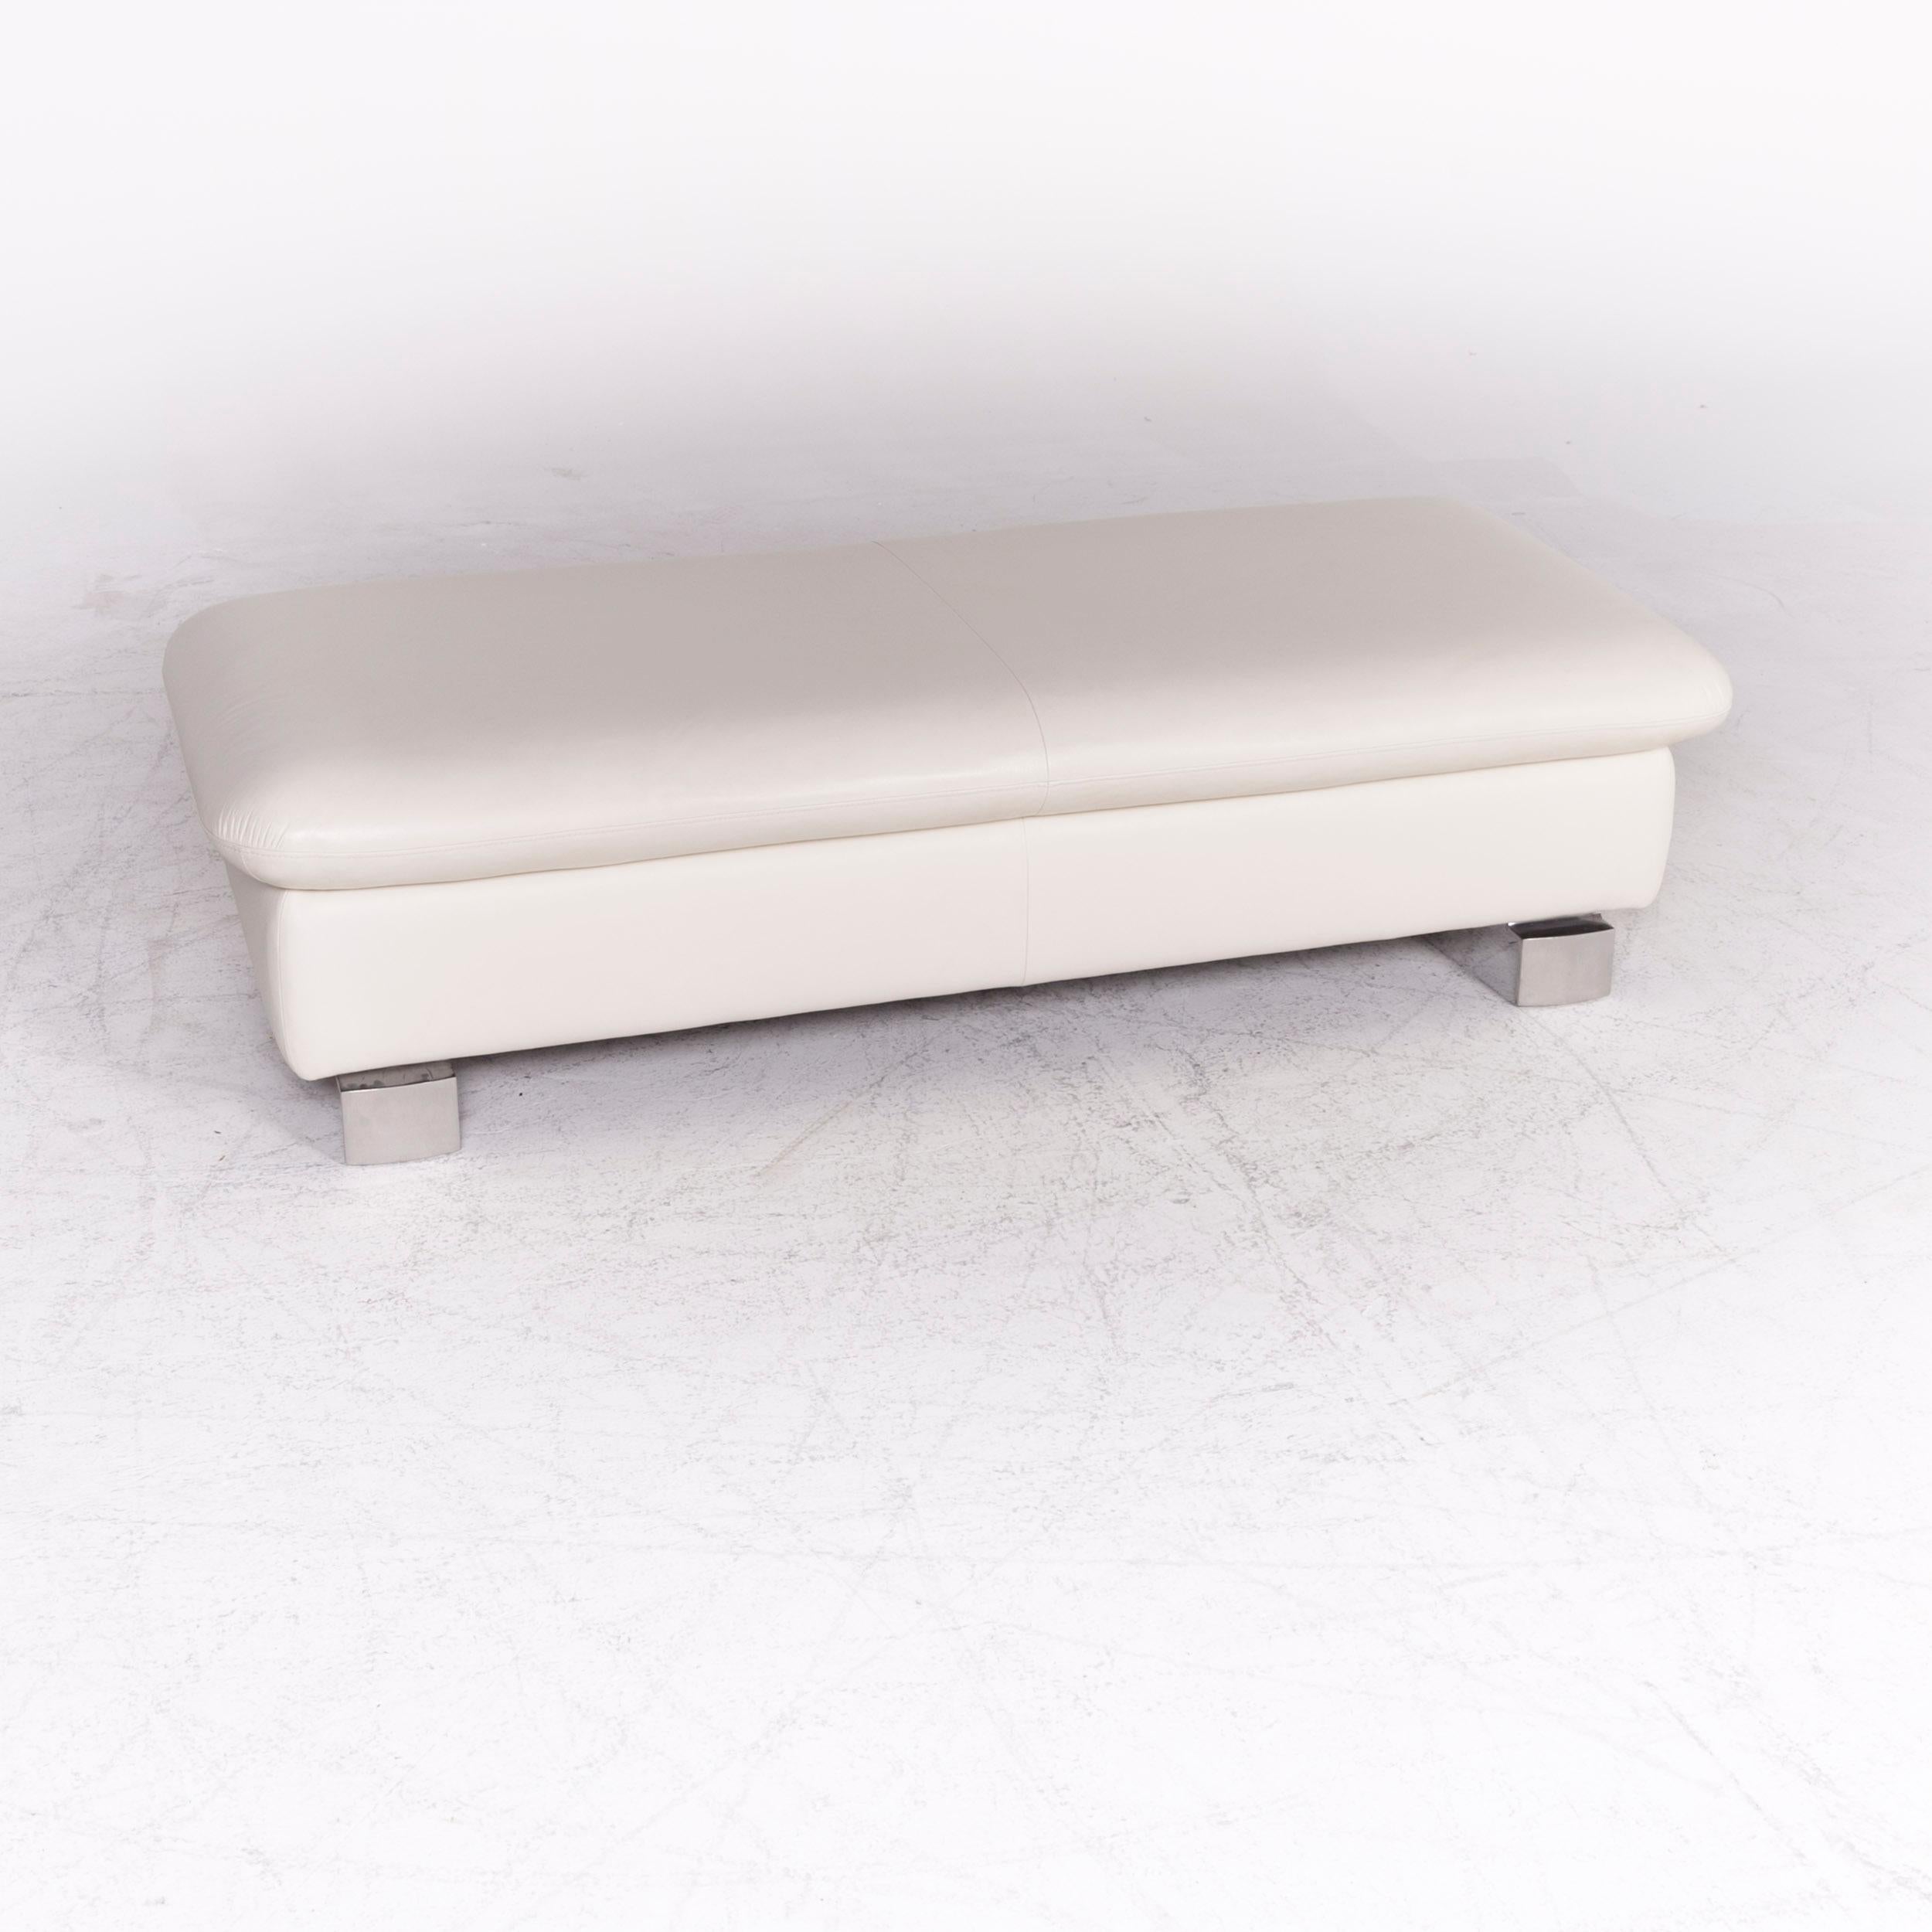 We bring to you a Willi Schillig designer leather stool cream genuine leather stool.

Product measurements in centimeters:

Dept: 66
Width 153
Height 41.





 